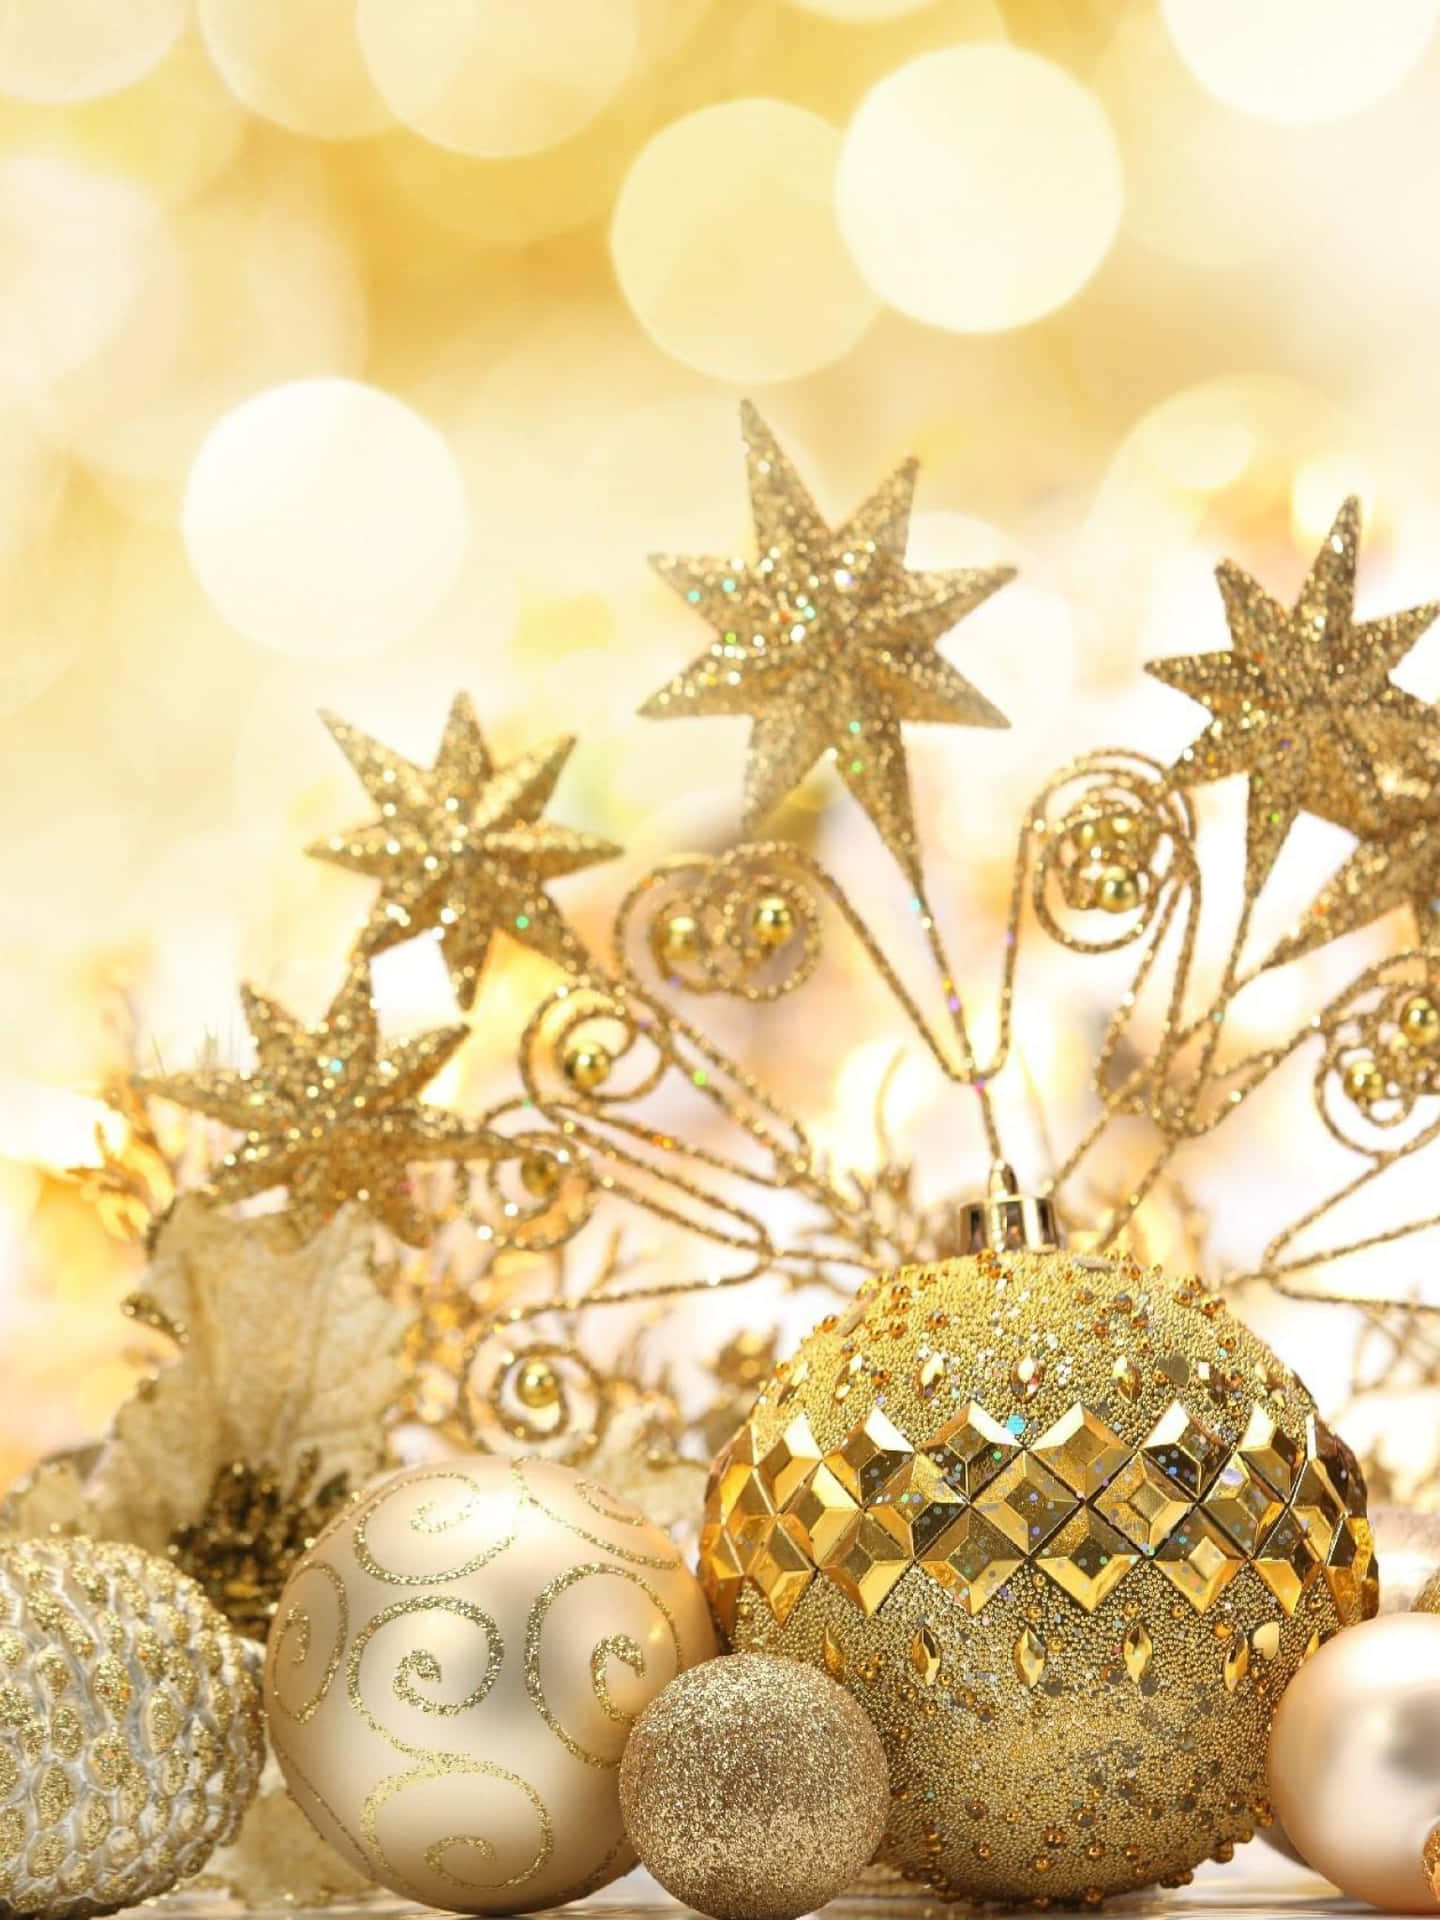 New Year Iphone Gold Ornaments Background